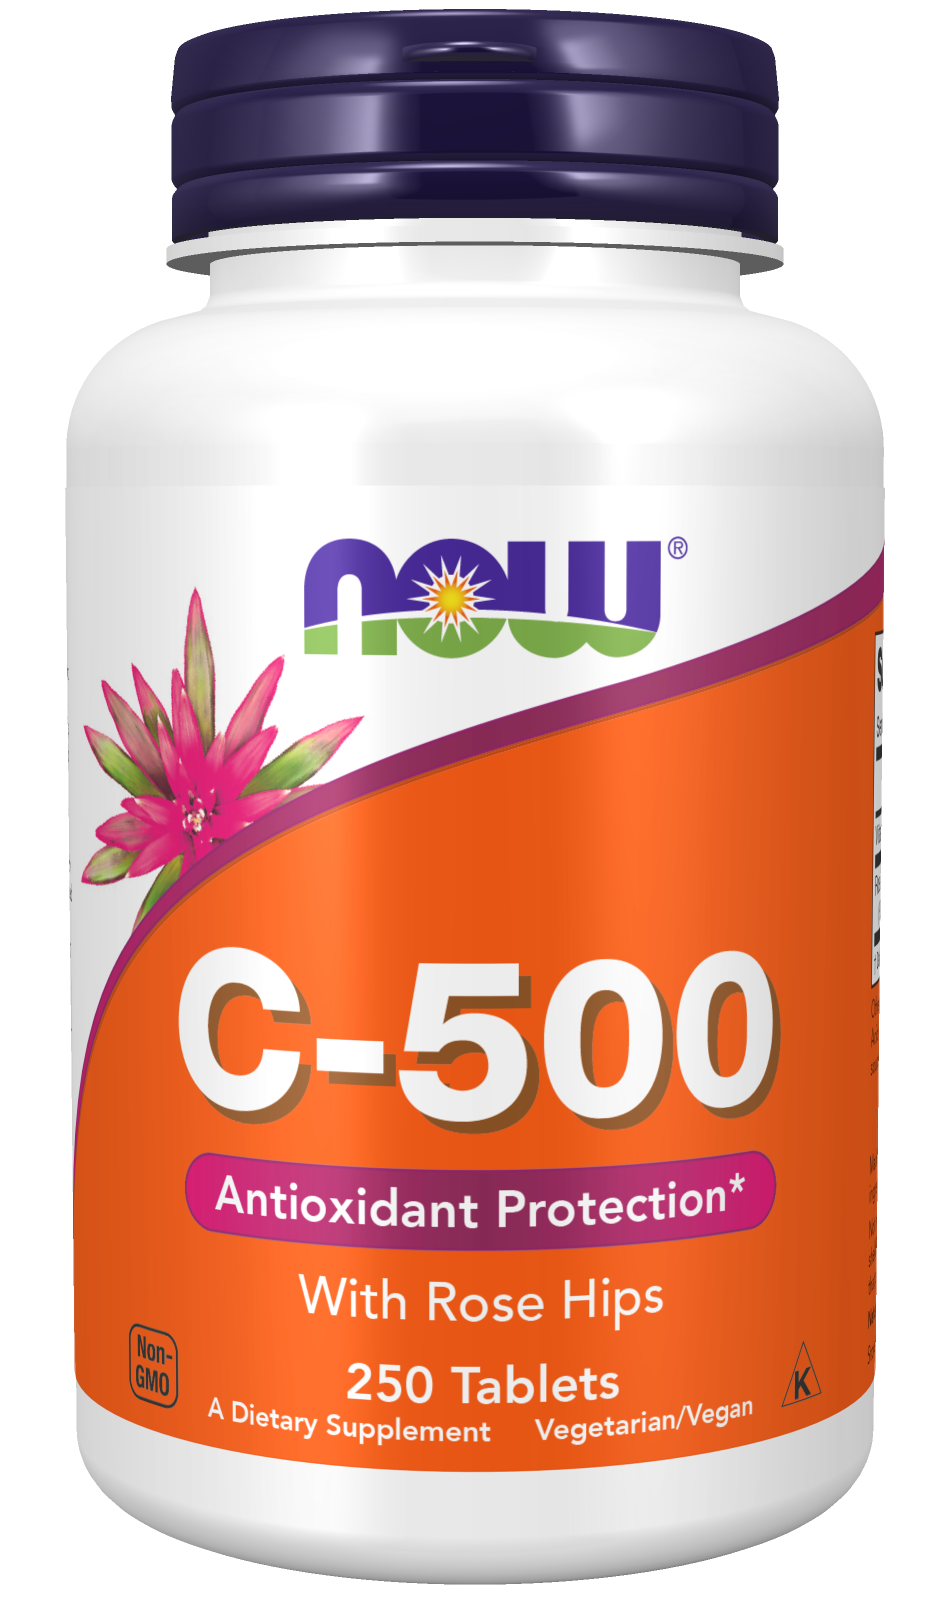 C-500 With Rose Hips 250 Tablets Antioxidant Protection*